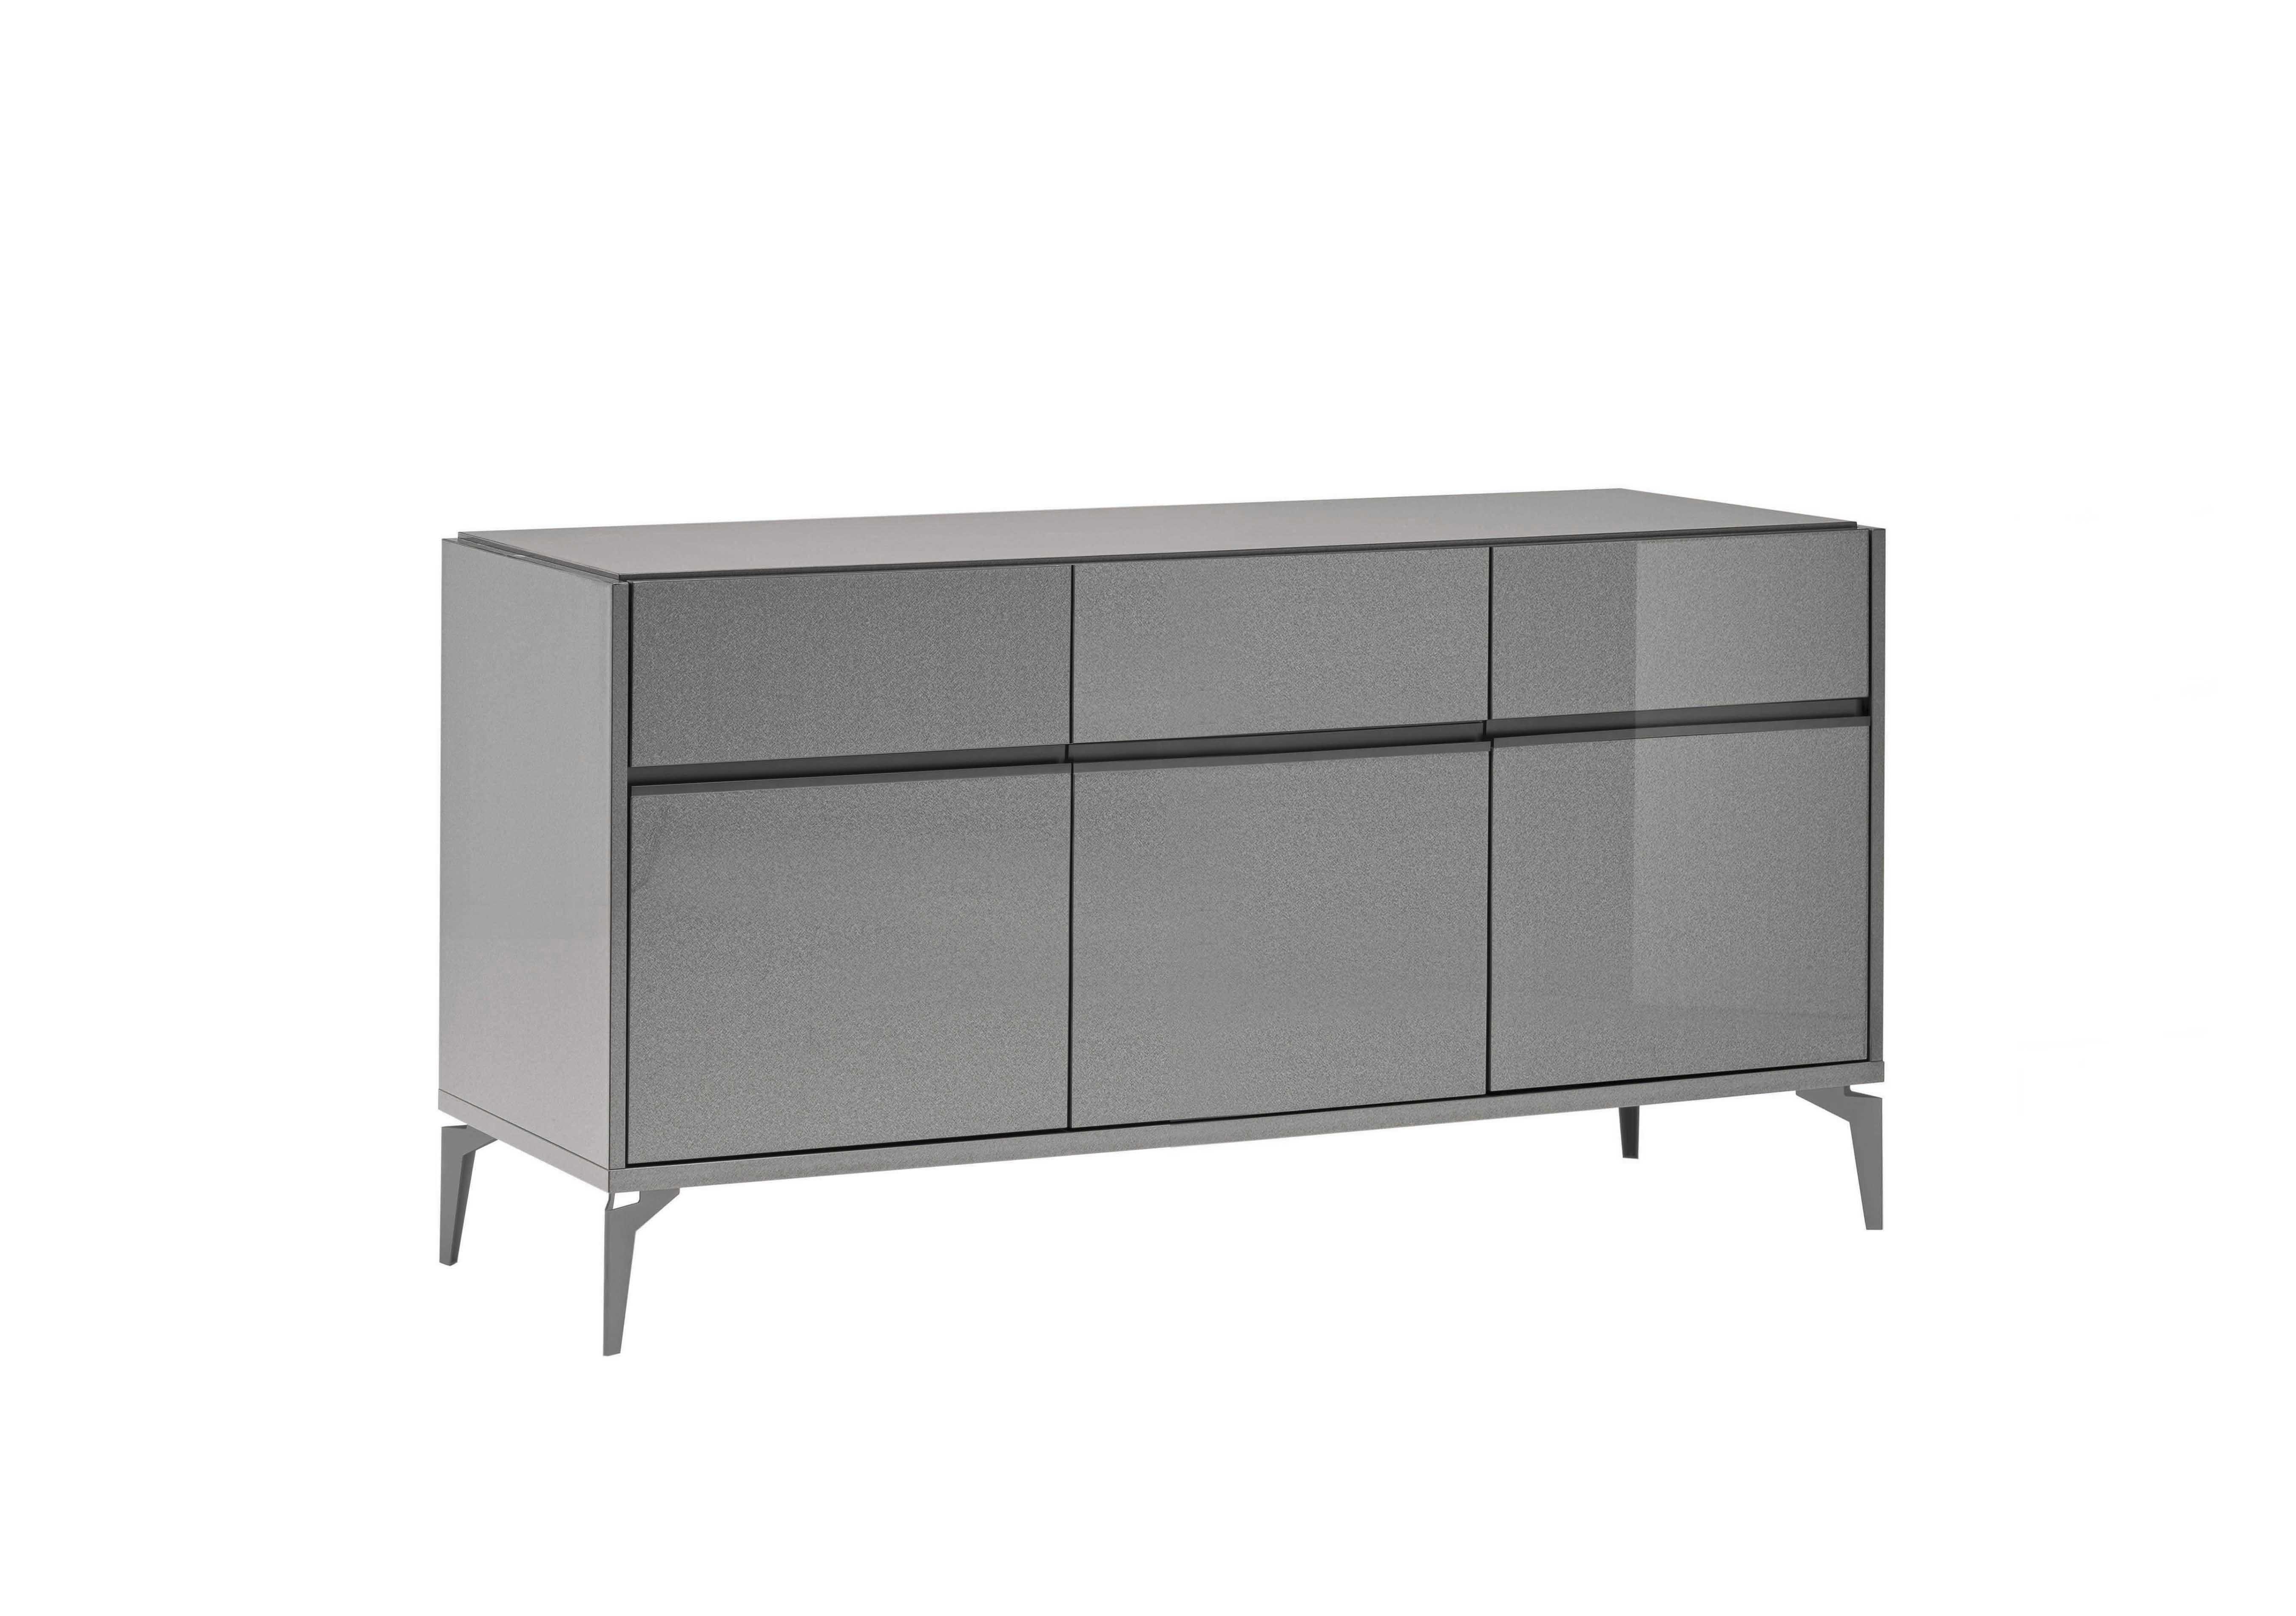 Cristina Small Sideboard in  on Furniture Village